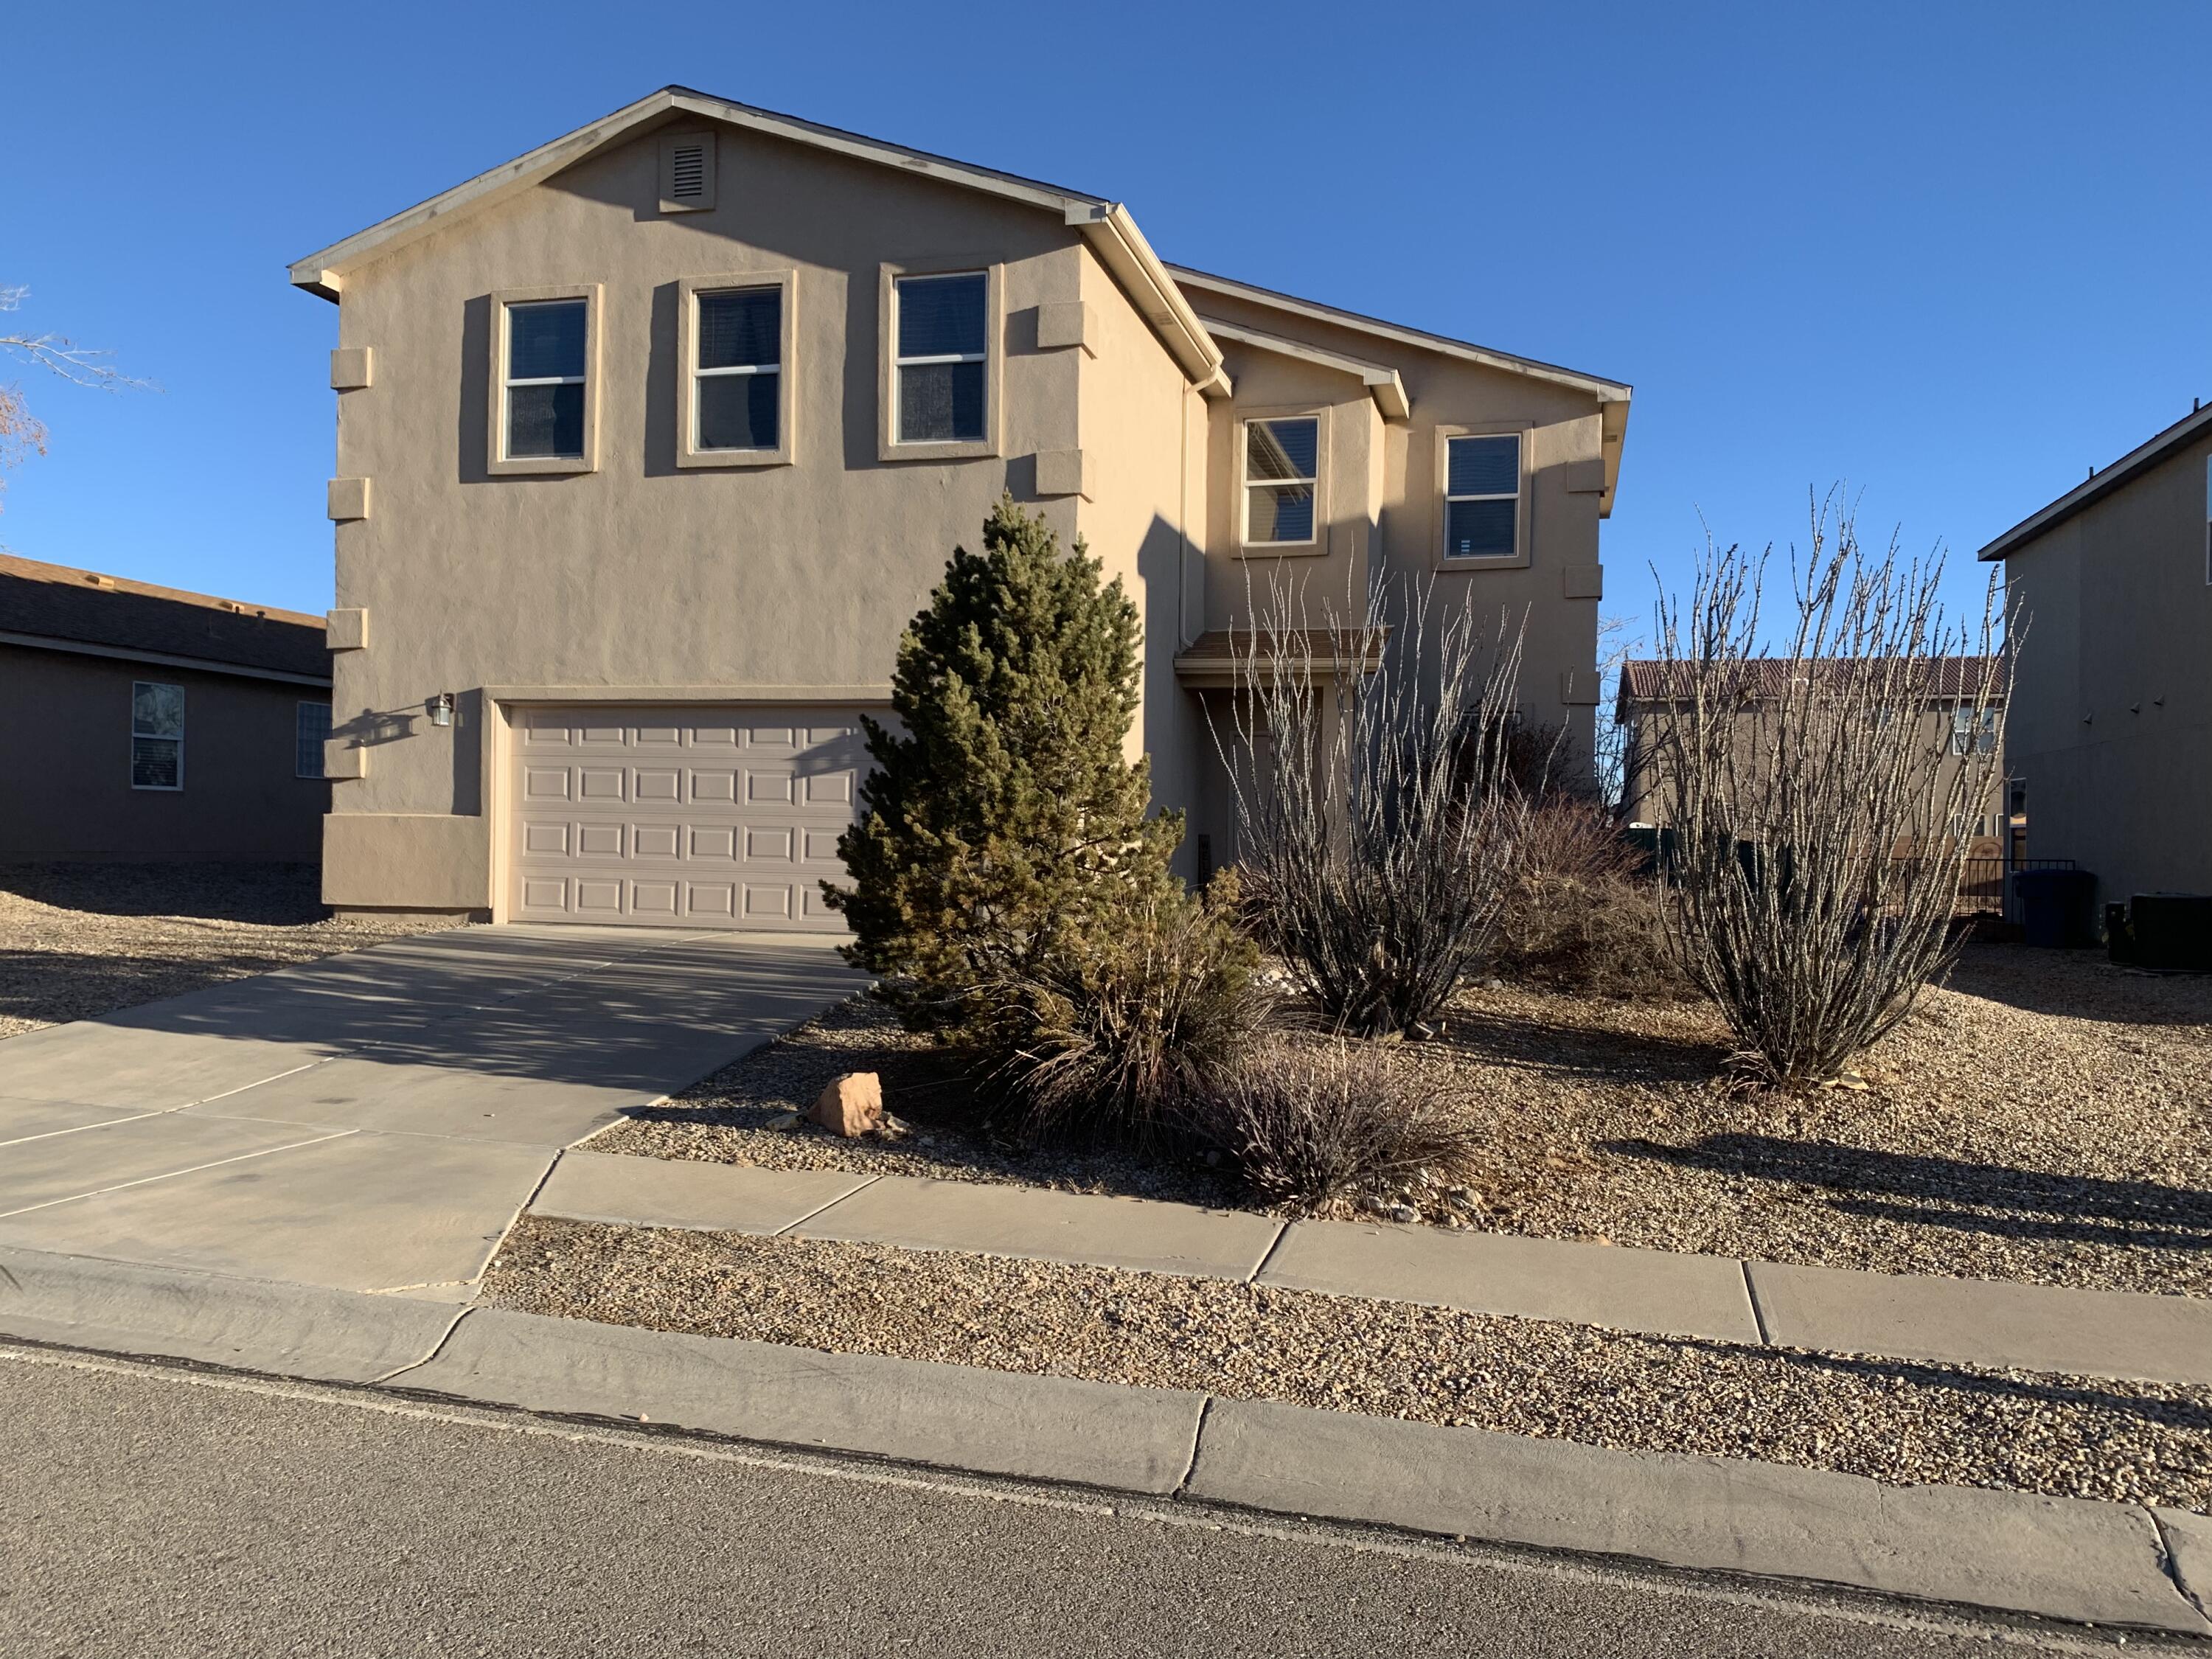 Great opportunity to own 3 bedrooms, 2.5 bathroom, finished 2 car garage. this home conveniently located in the Huning Ranch subdivision near shopping, dining and quick freeway access. You'll have plenty of room in this spacious home which features two living areas! Movie/Theater system will convey with an acceptable offer by seller.